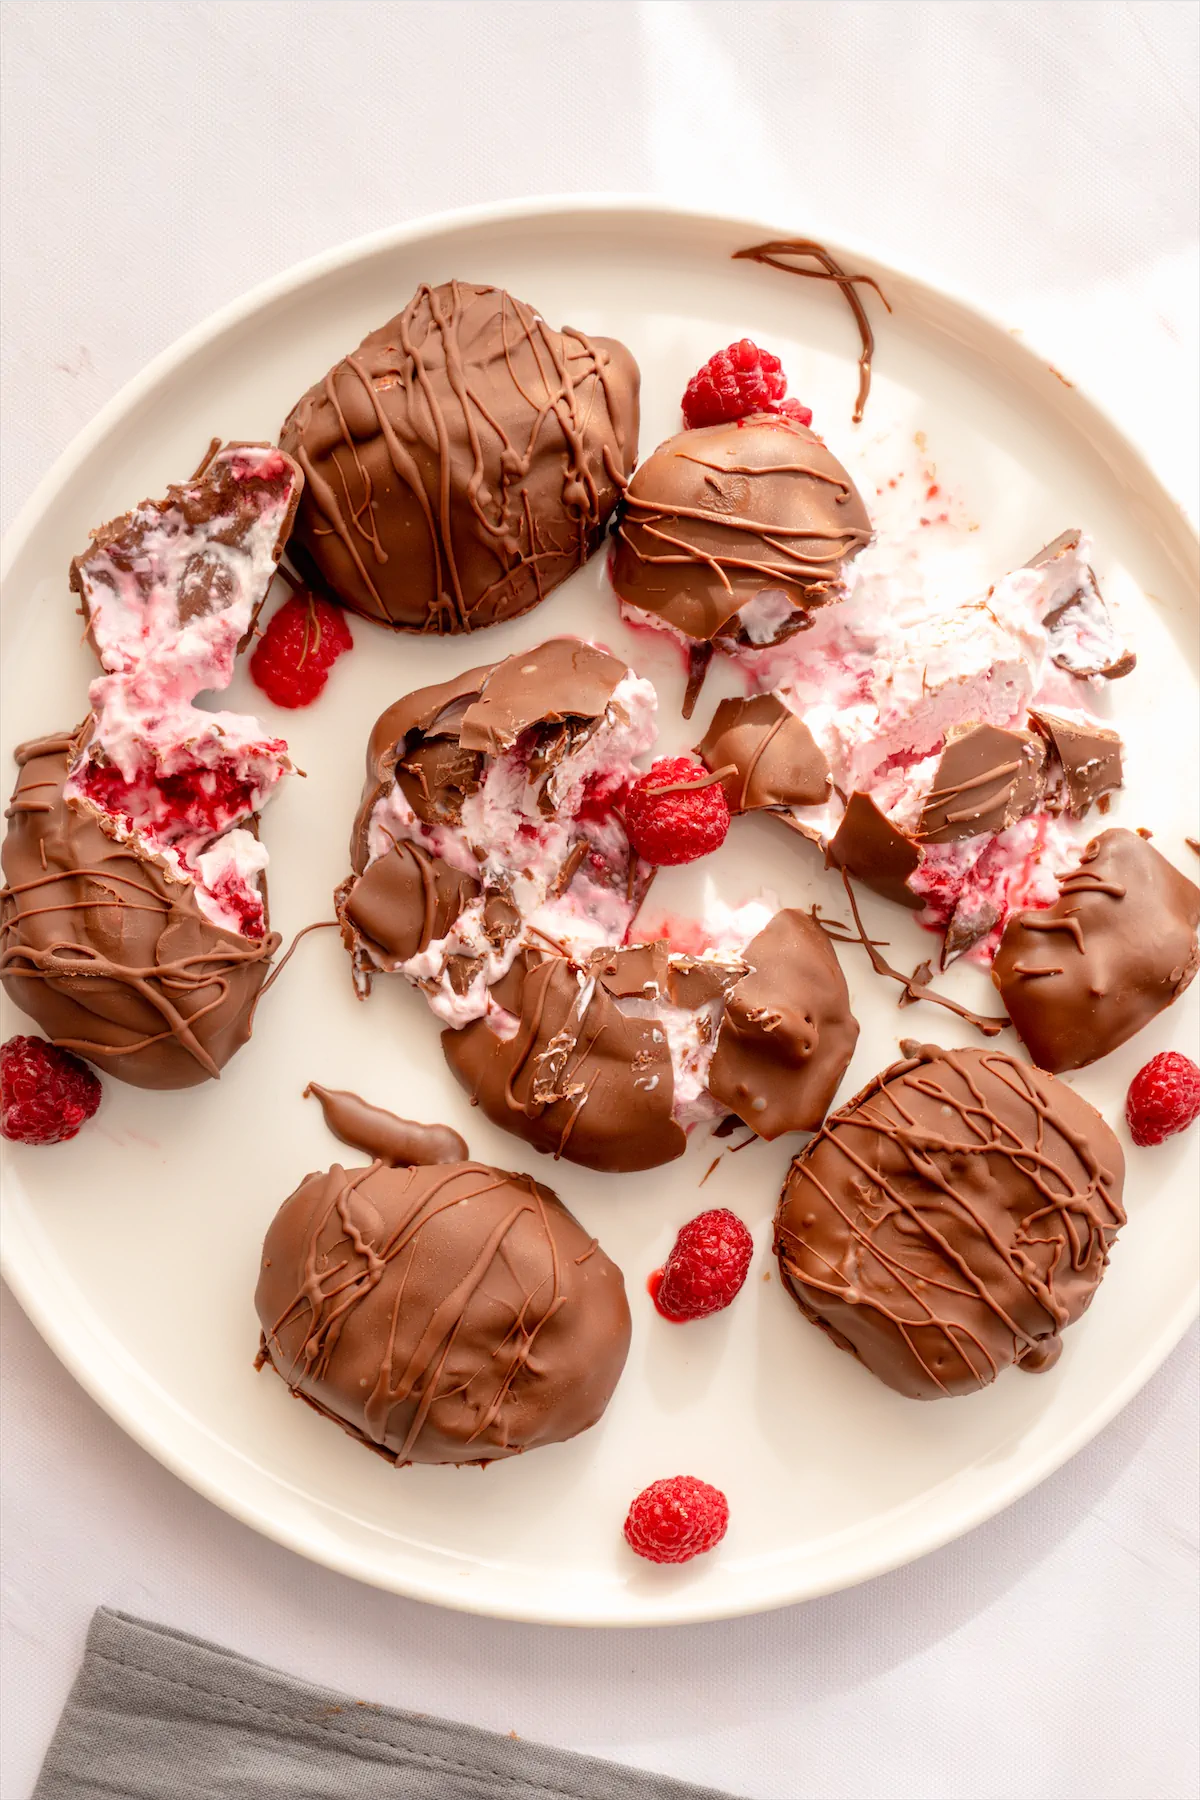 Dark-chocolate-covered frozen yogurt bites decorated with some raspberries are on a plate, some of them sliced open.